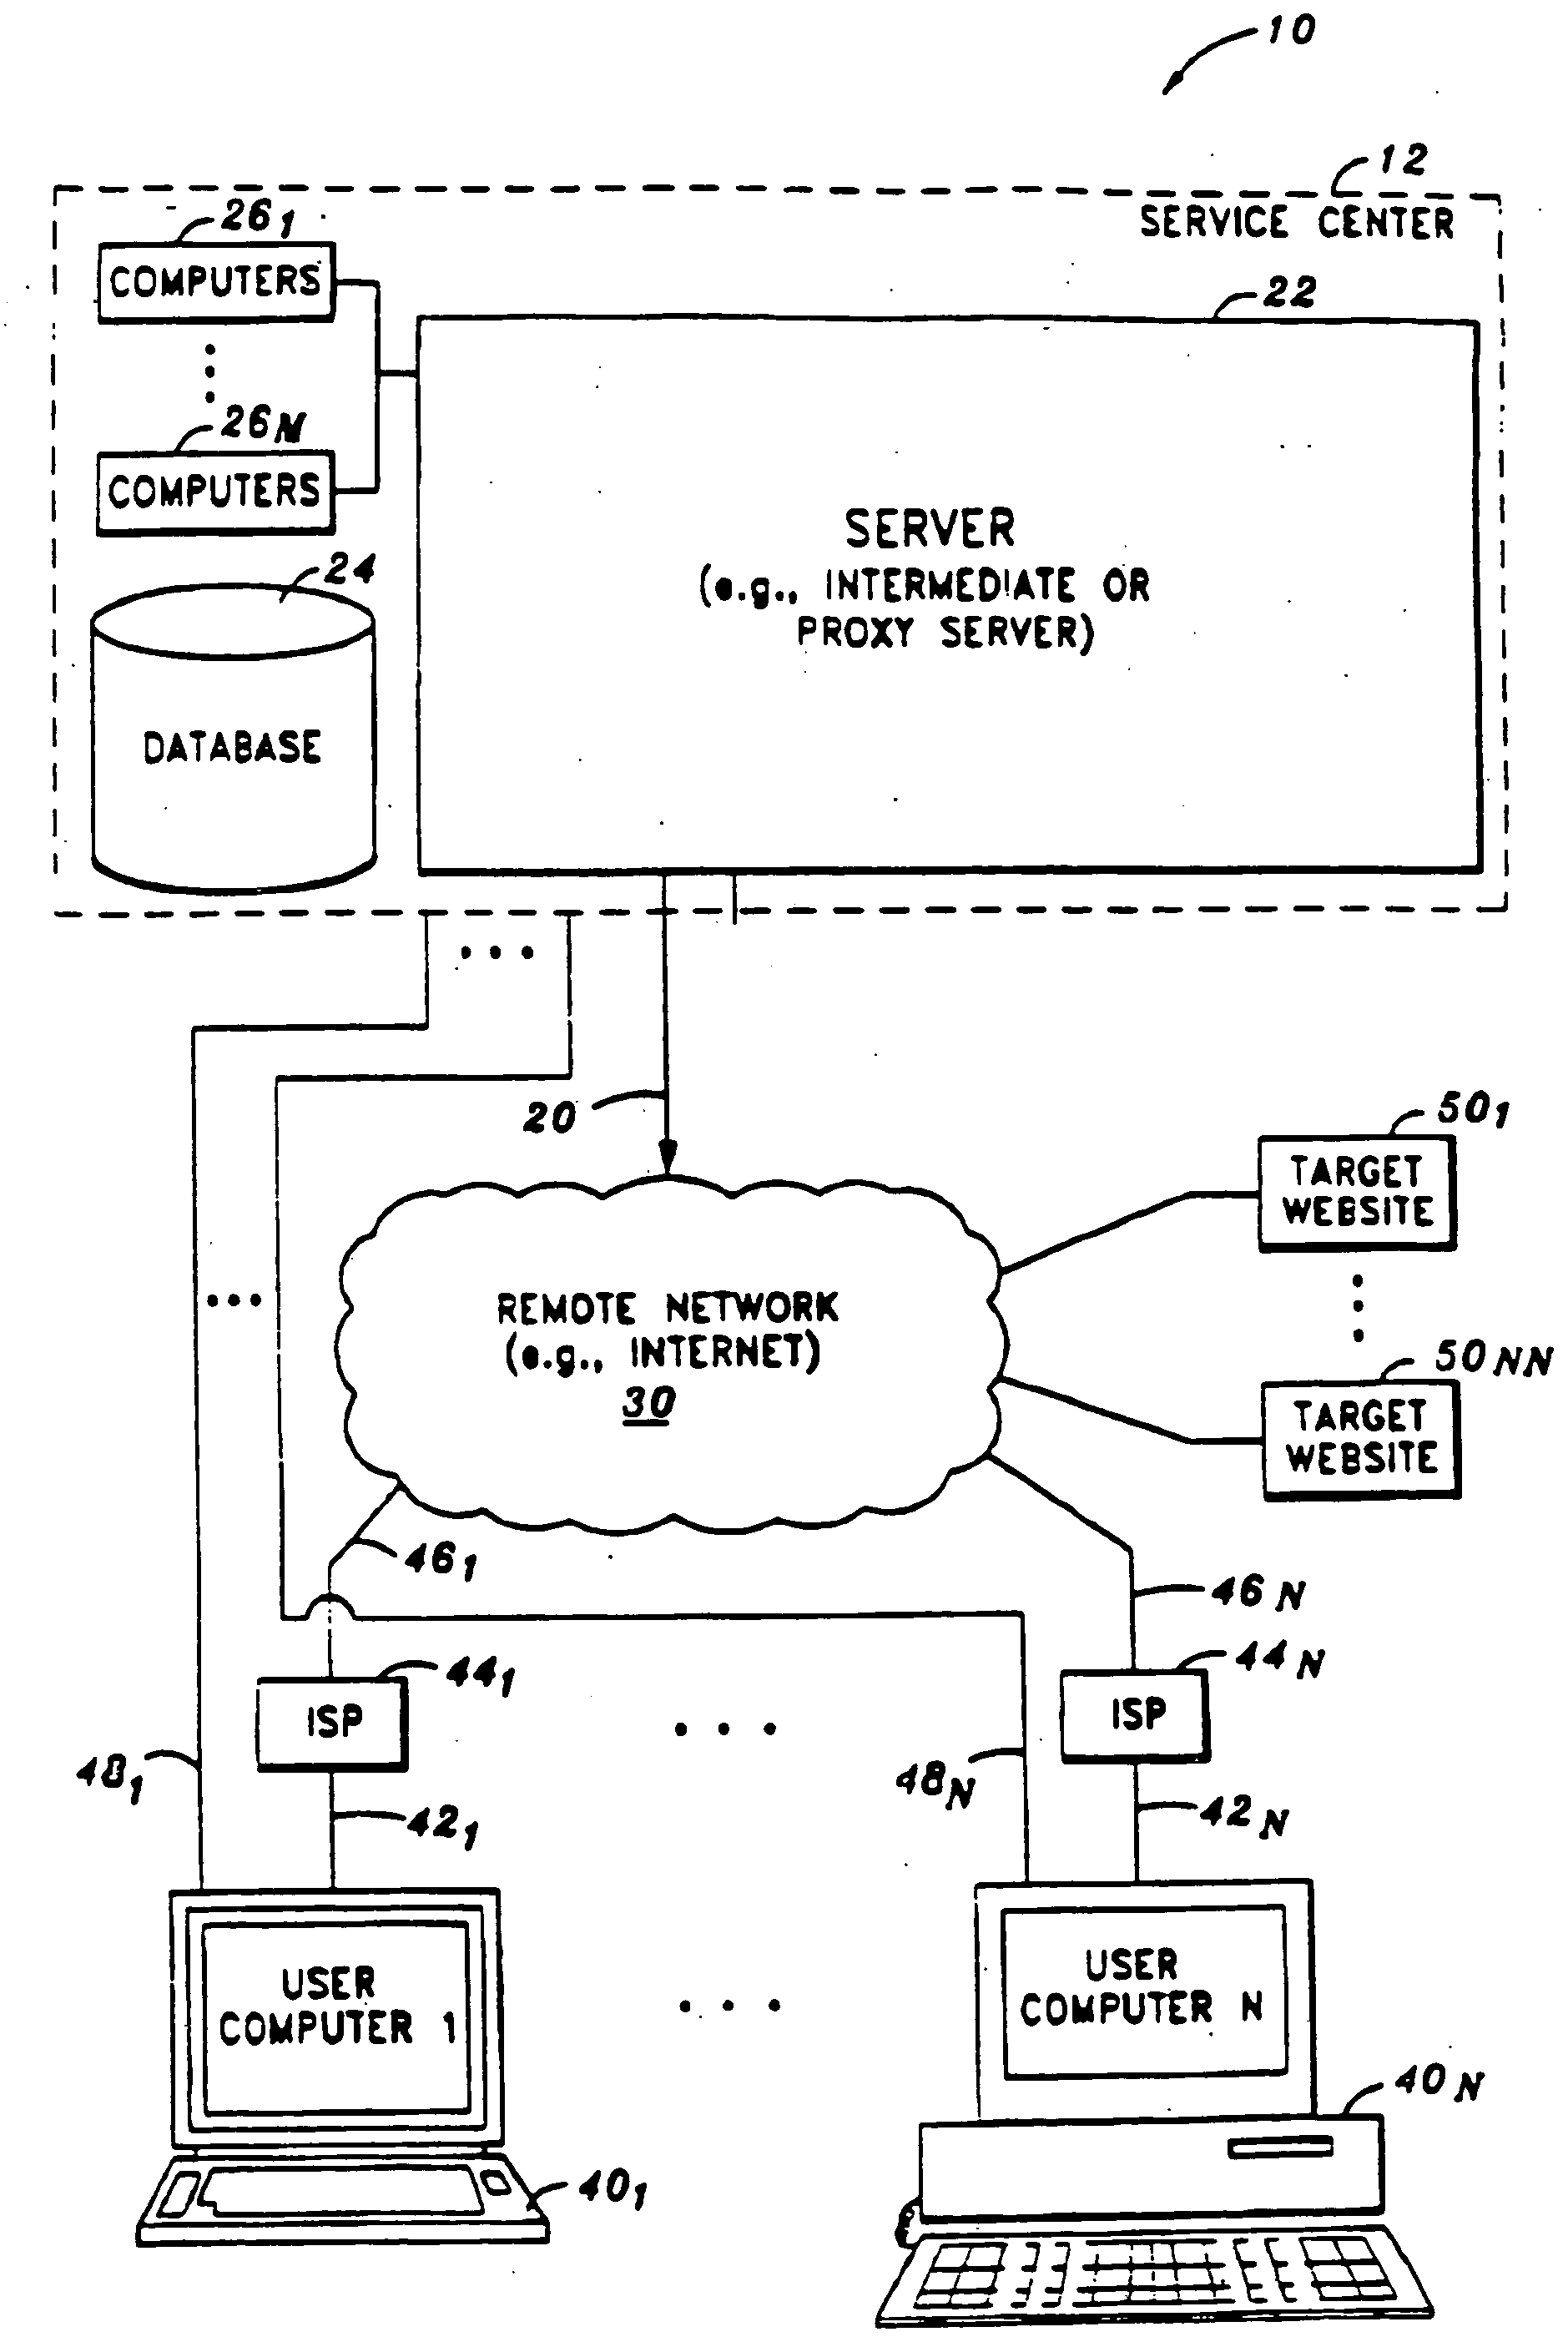 System and method for identifying information